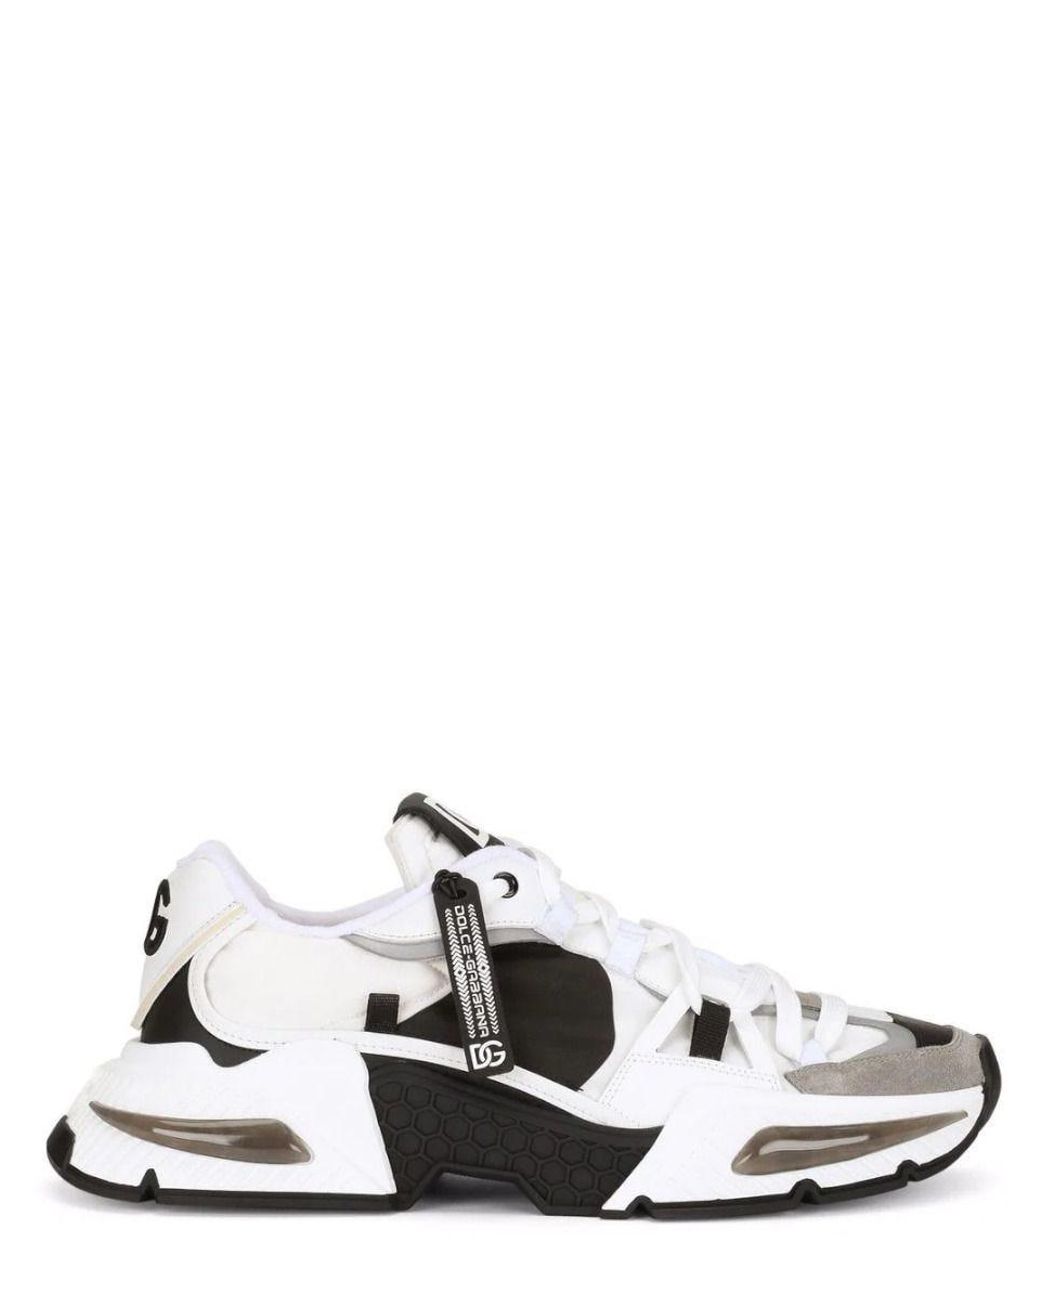 Dolce & Gabbana Black Panelled Airmaster Sneakers in White | Lyst